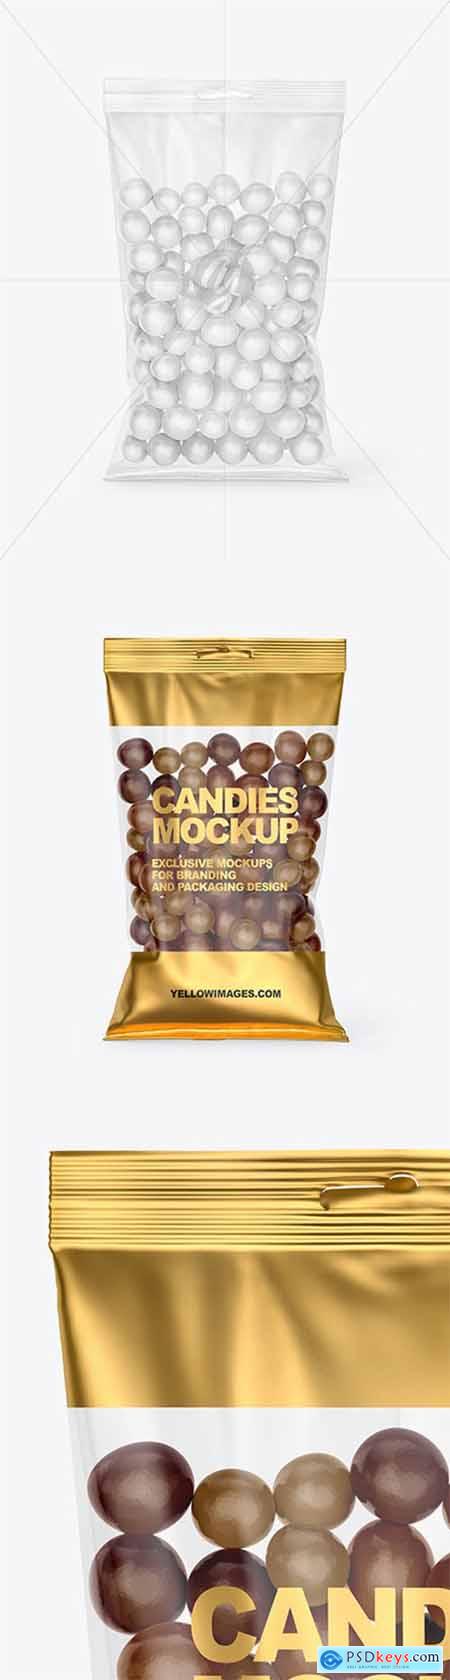 Download Bag With Candies Mockup 56302 Free Download Photoshop Vector Stock Image Via Torrent Zippyshare From Psdkeys Com Yellowimages Mockups